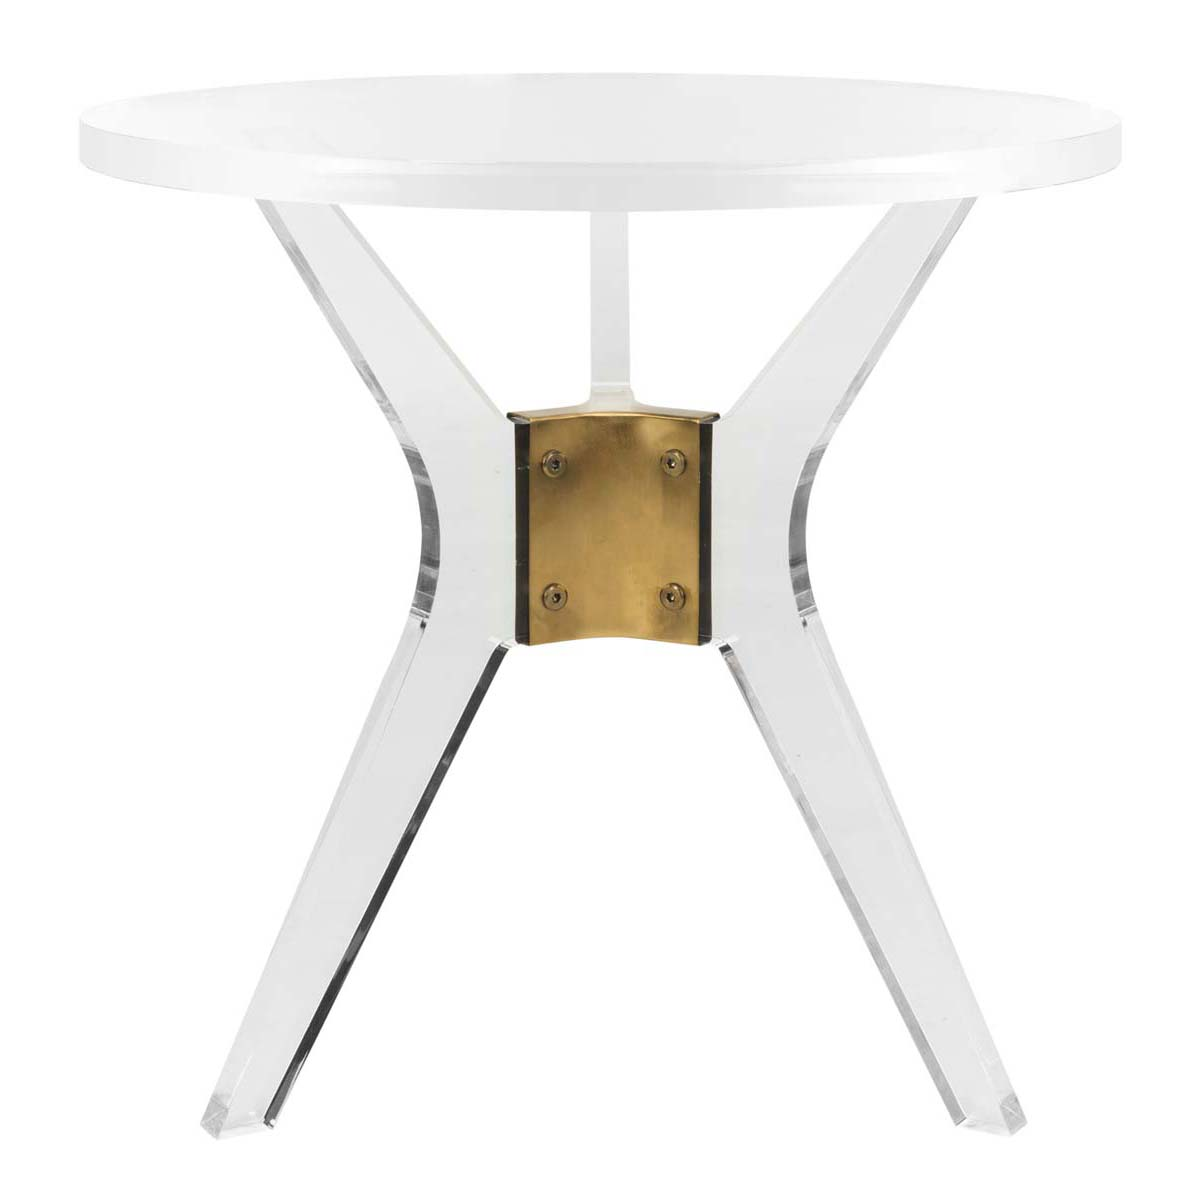 Safavieh Couture Werner Acrylic End Table, SFV2532 - Clear